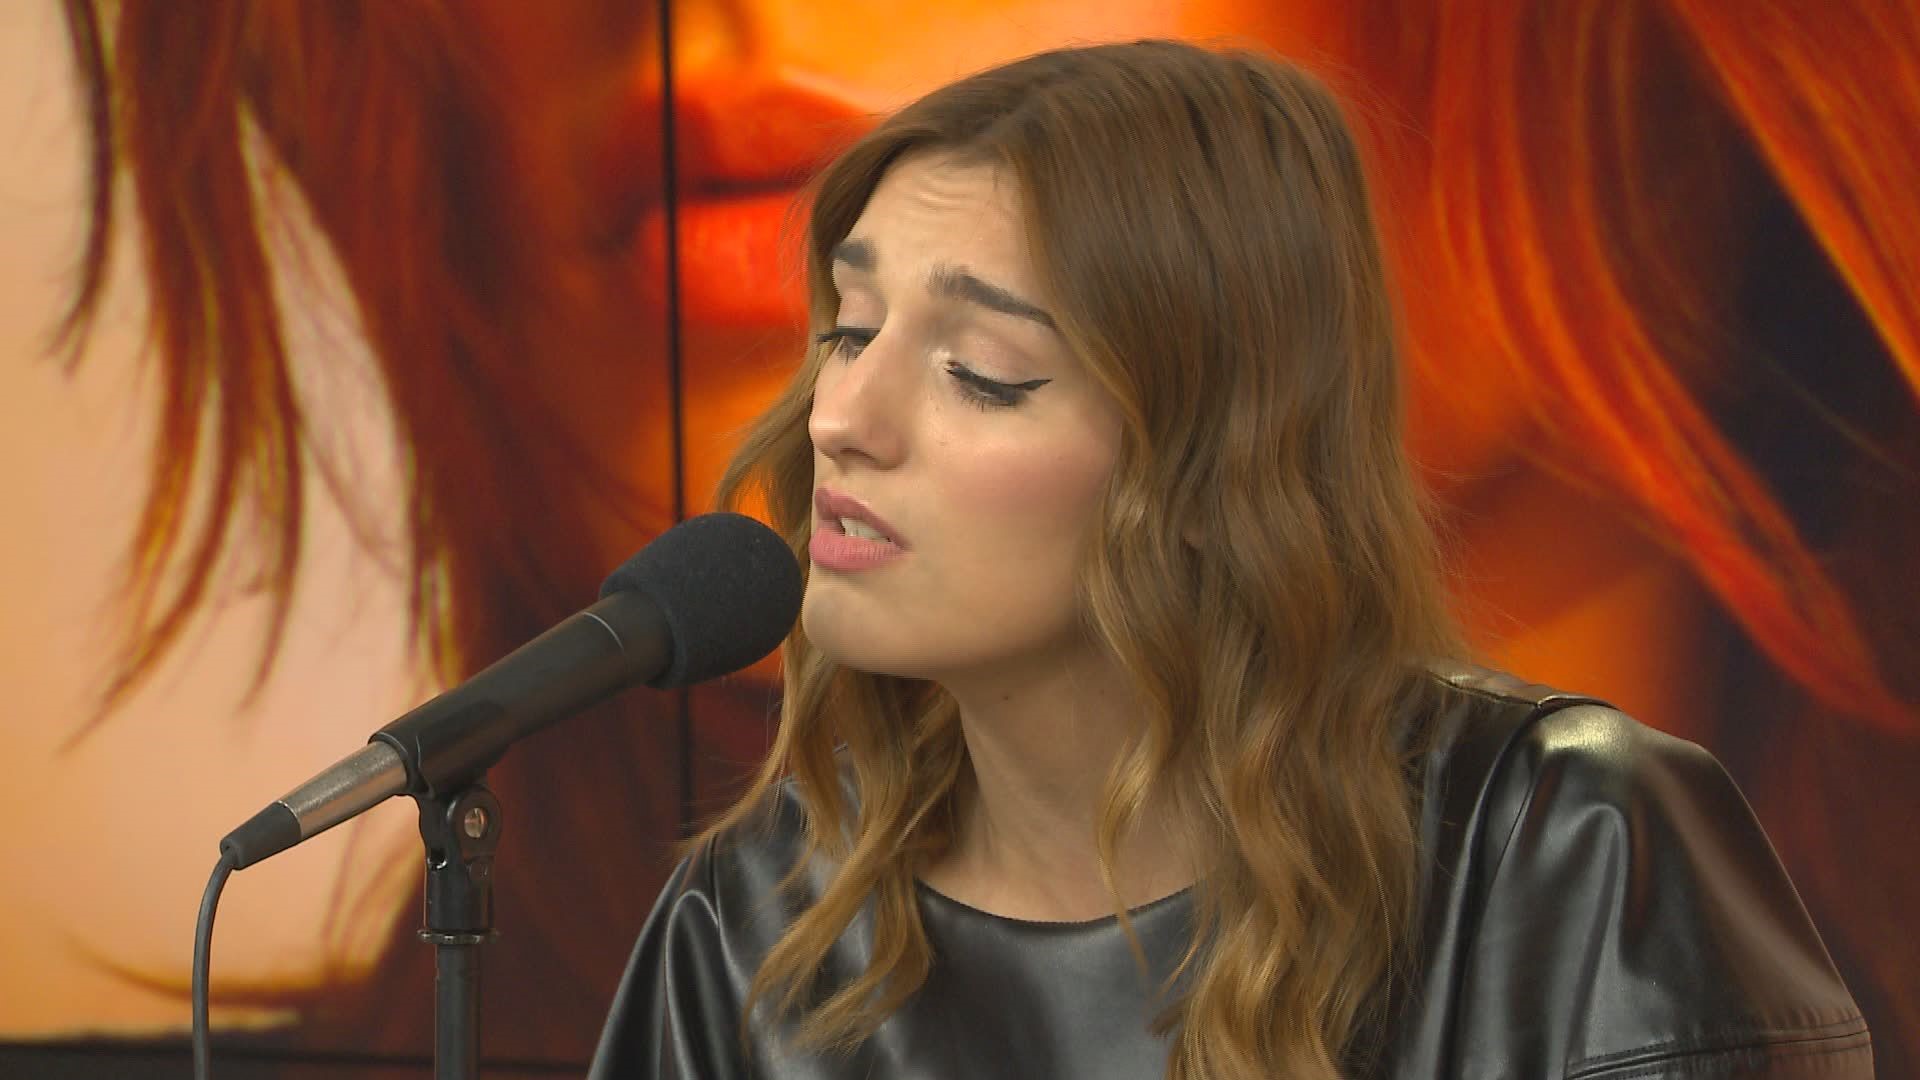 Gabriella Rose gives an exclusive performance of her new song 'In the Dark' on Up with KREM. Plus an exclusive interview with the local singer.